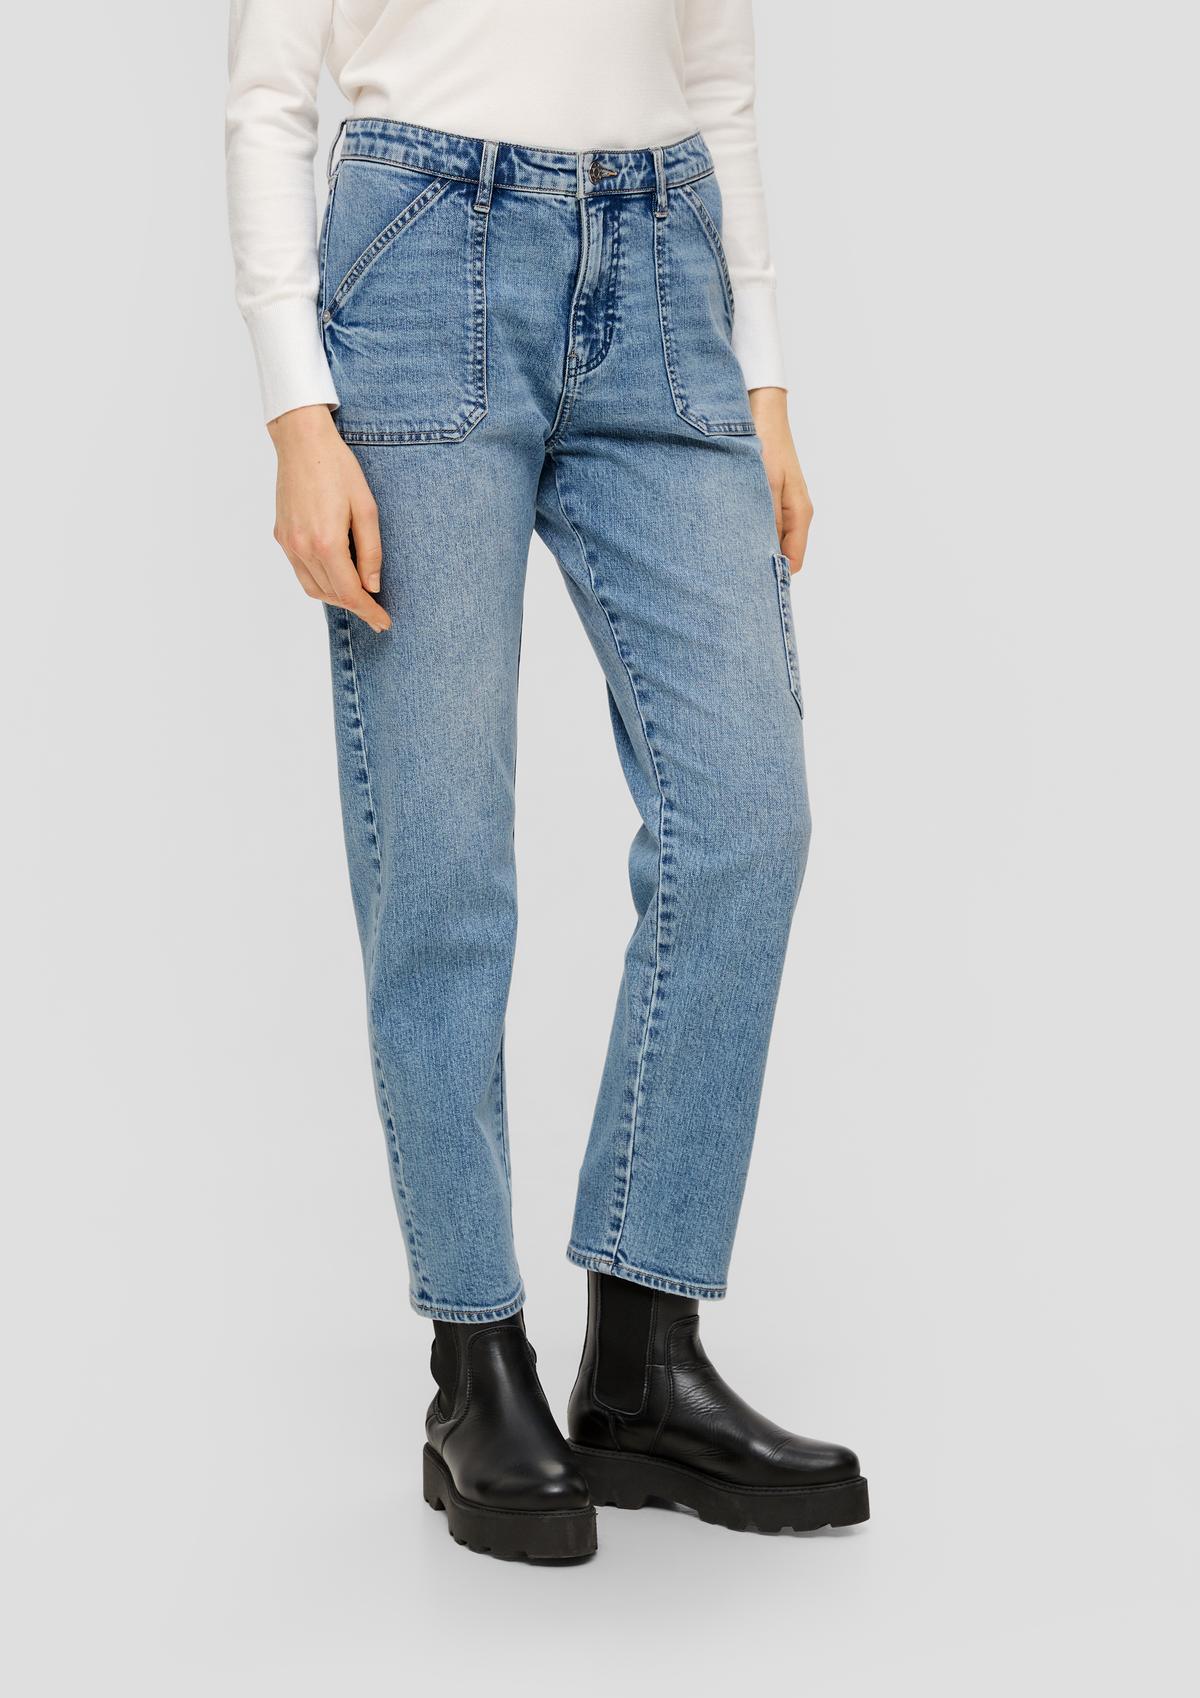 s.Oliver Ankle Jeans Slim Boyfriend / Relaxed Fit / Mid Rise / Straight Leg